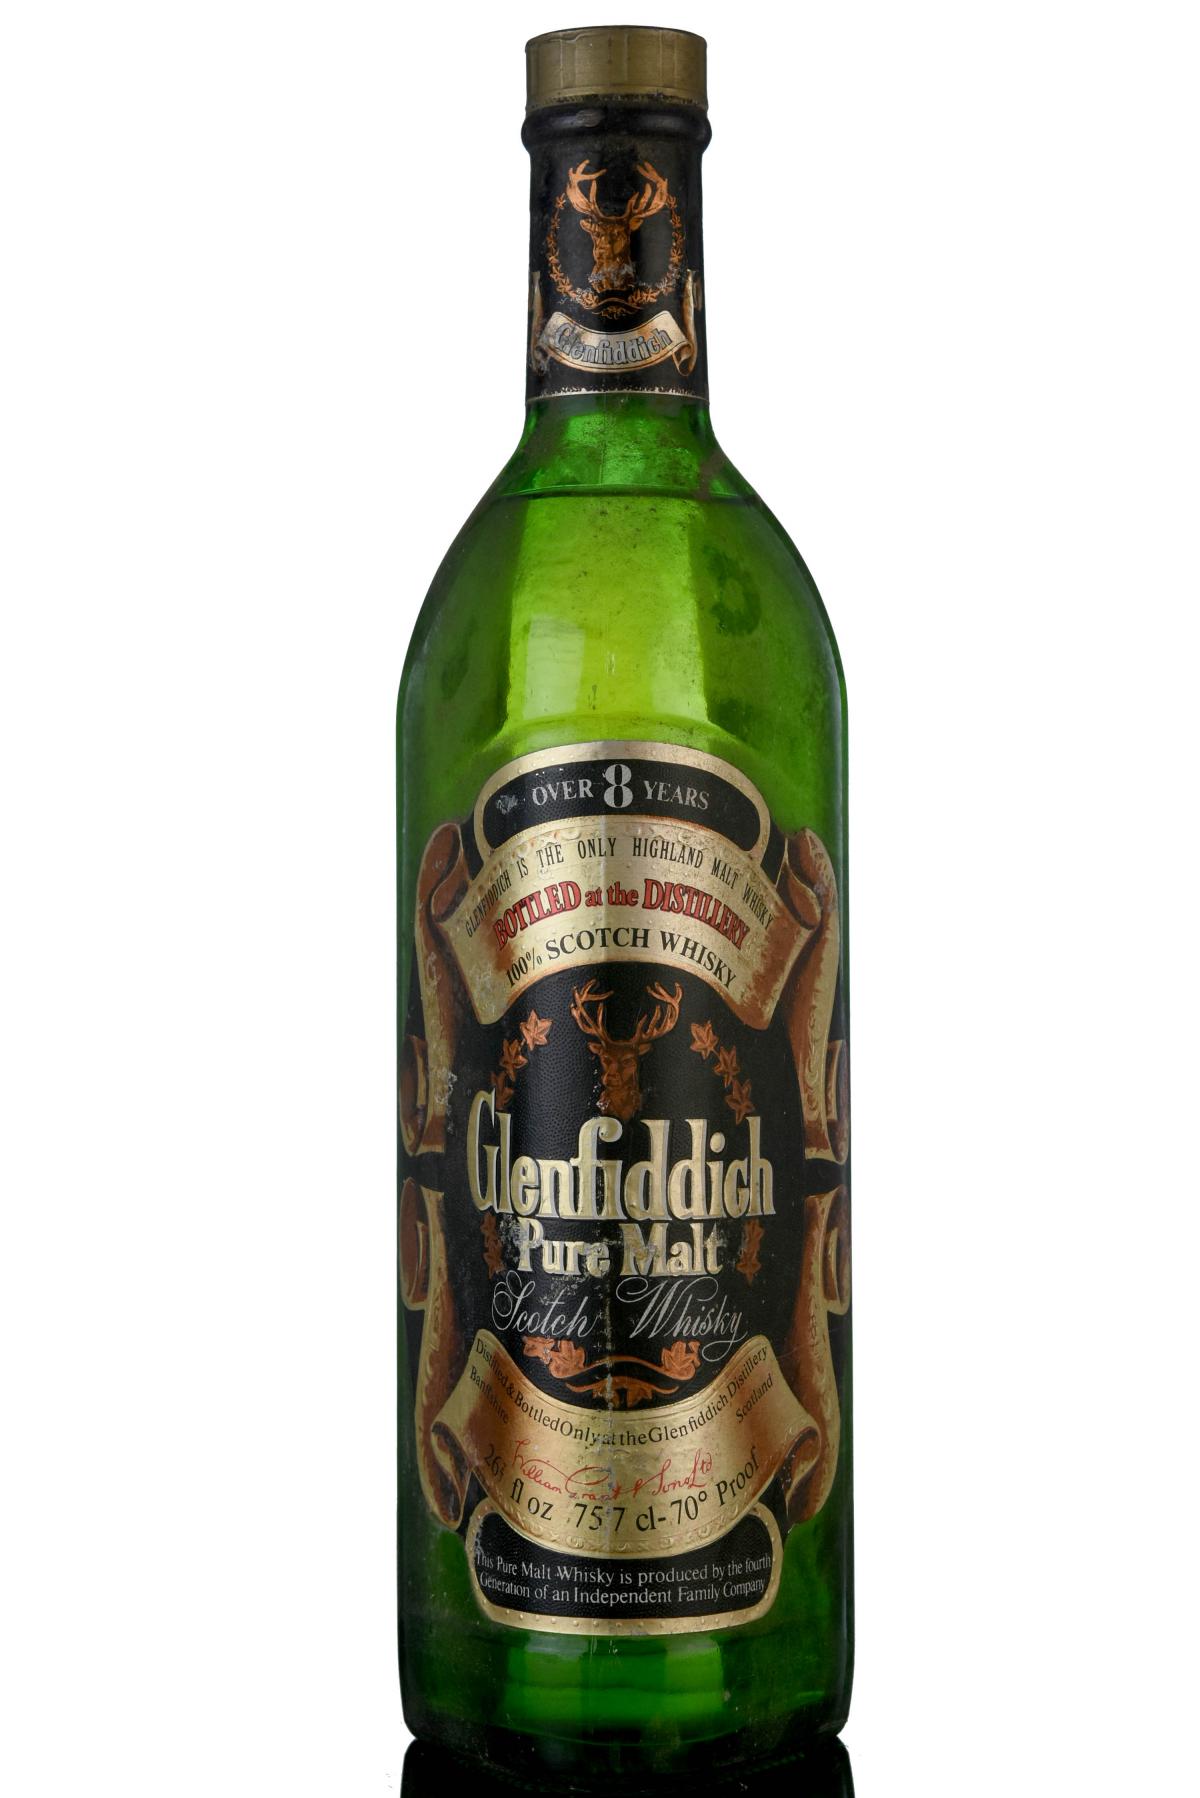 Glenfiddich 8 Year Old - Late 1970s